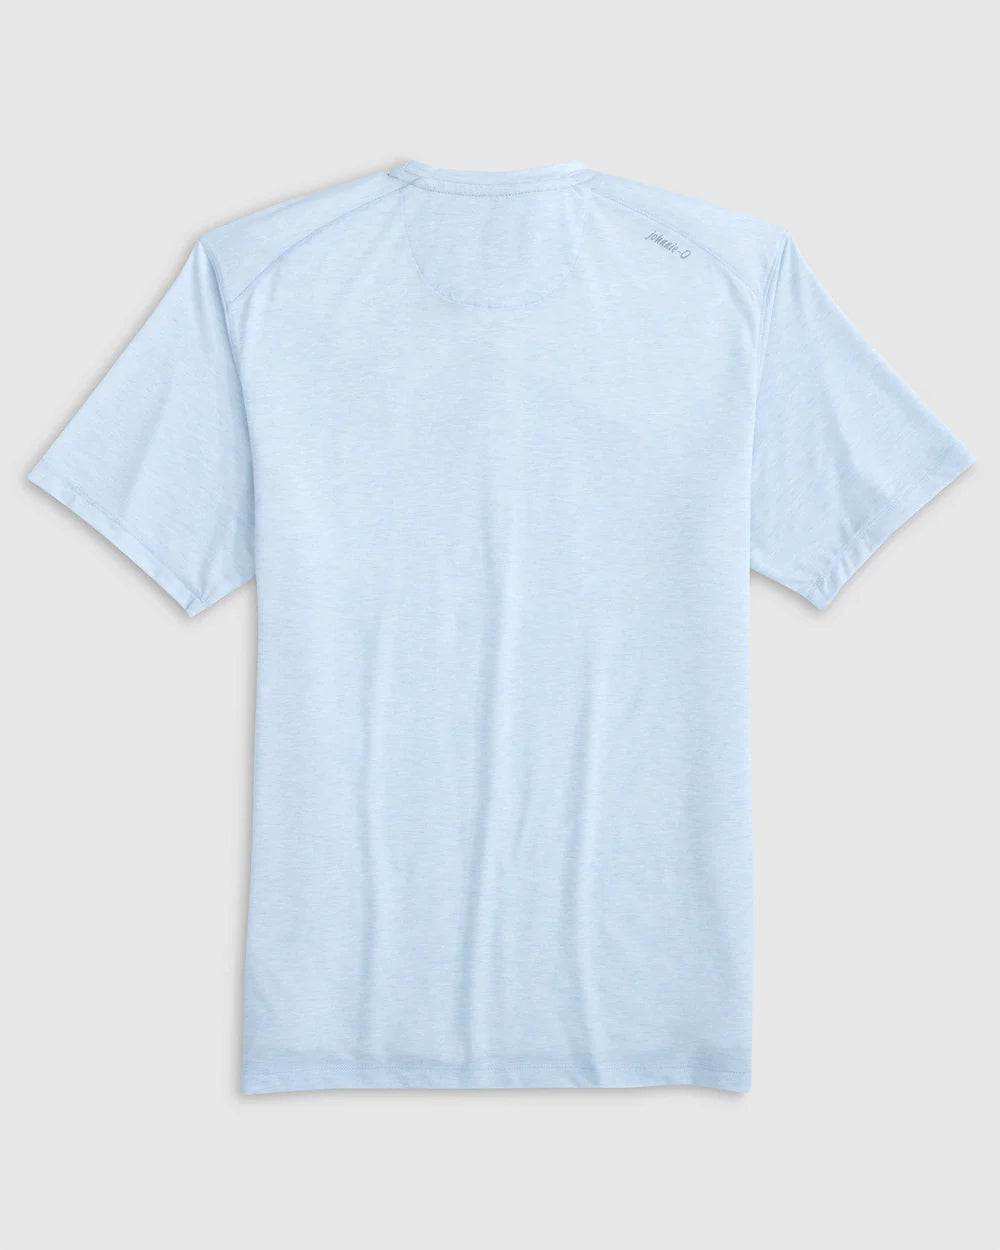 The Course Performance T-Shirt in Breeze